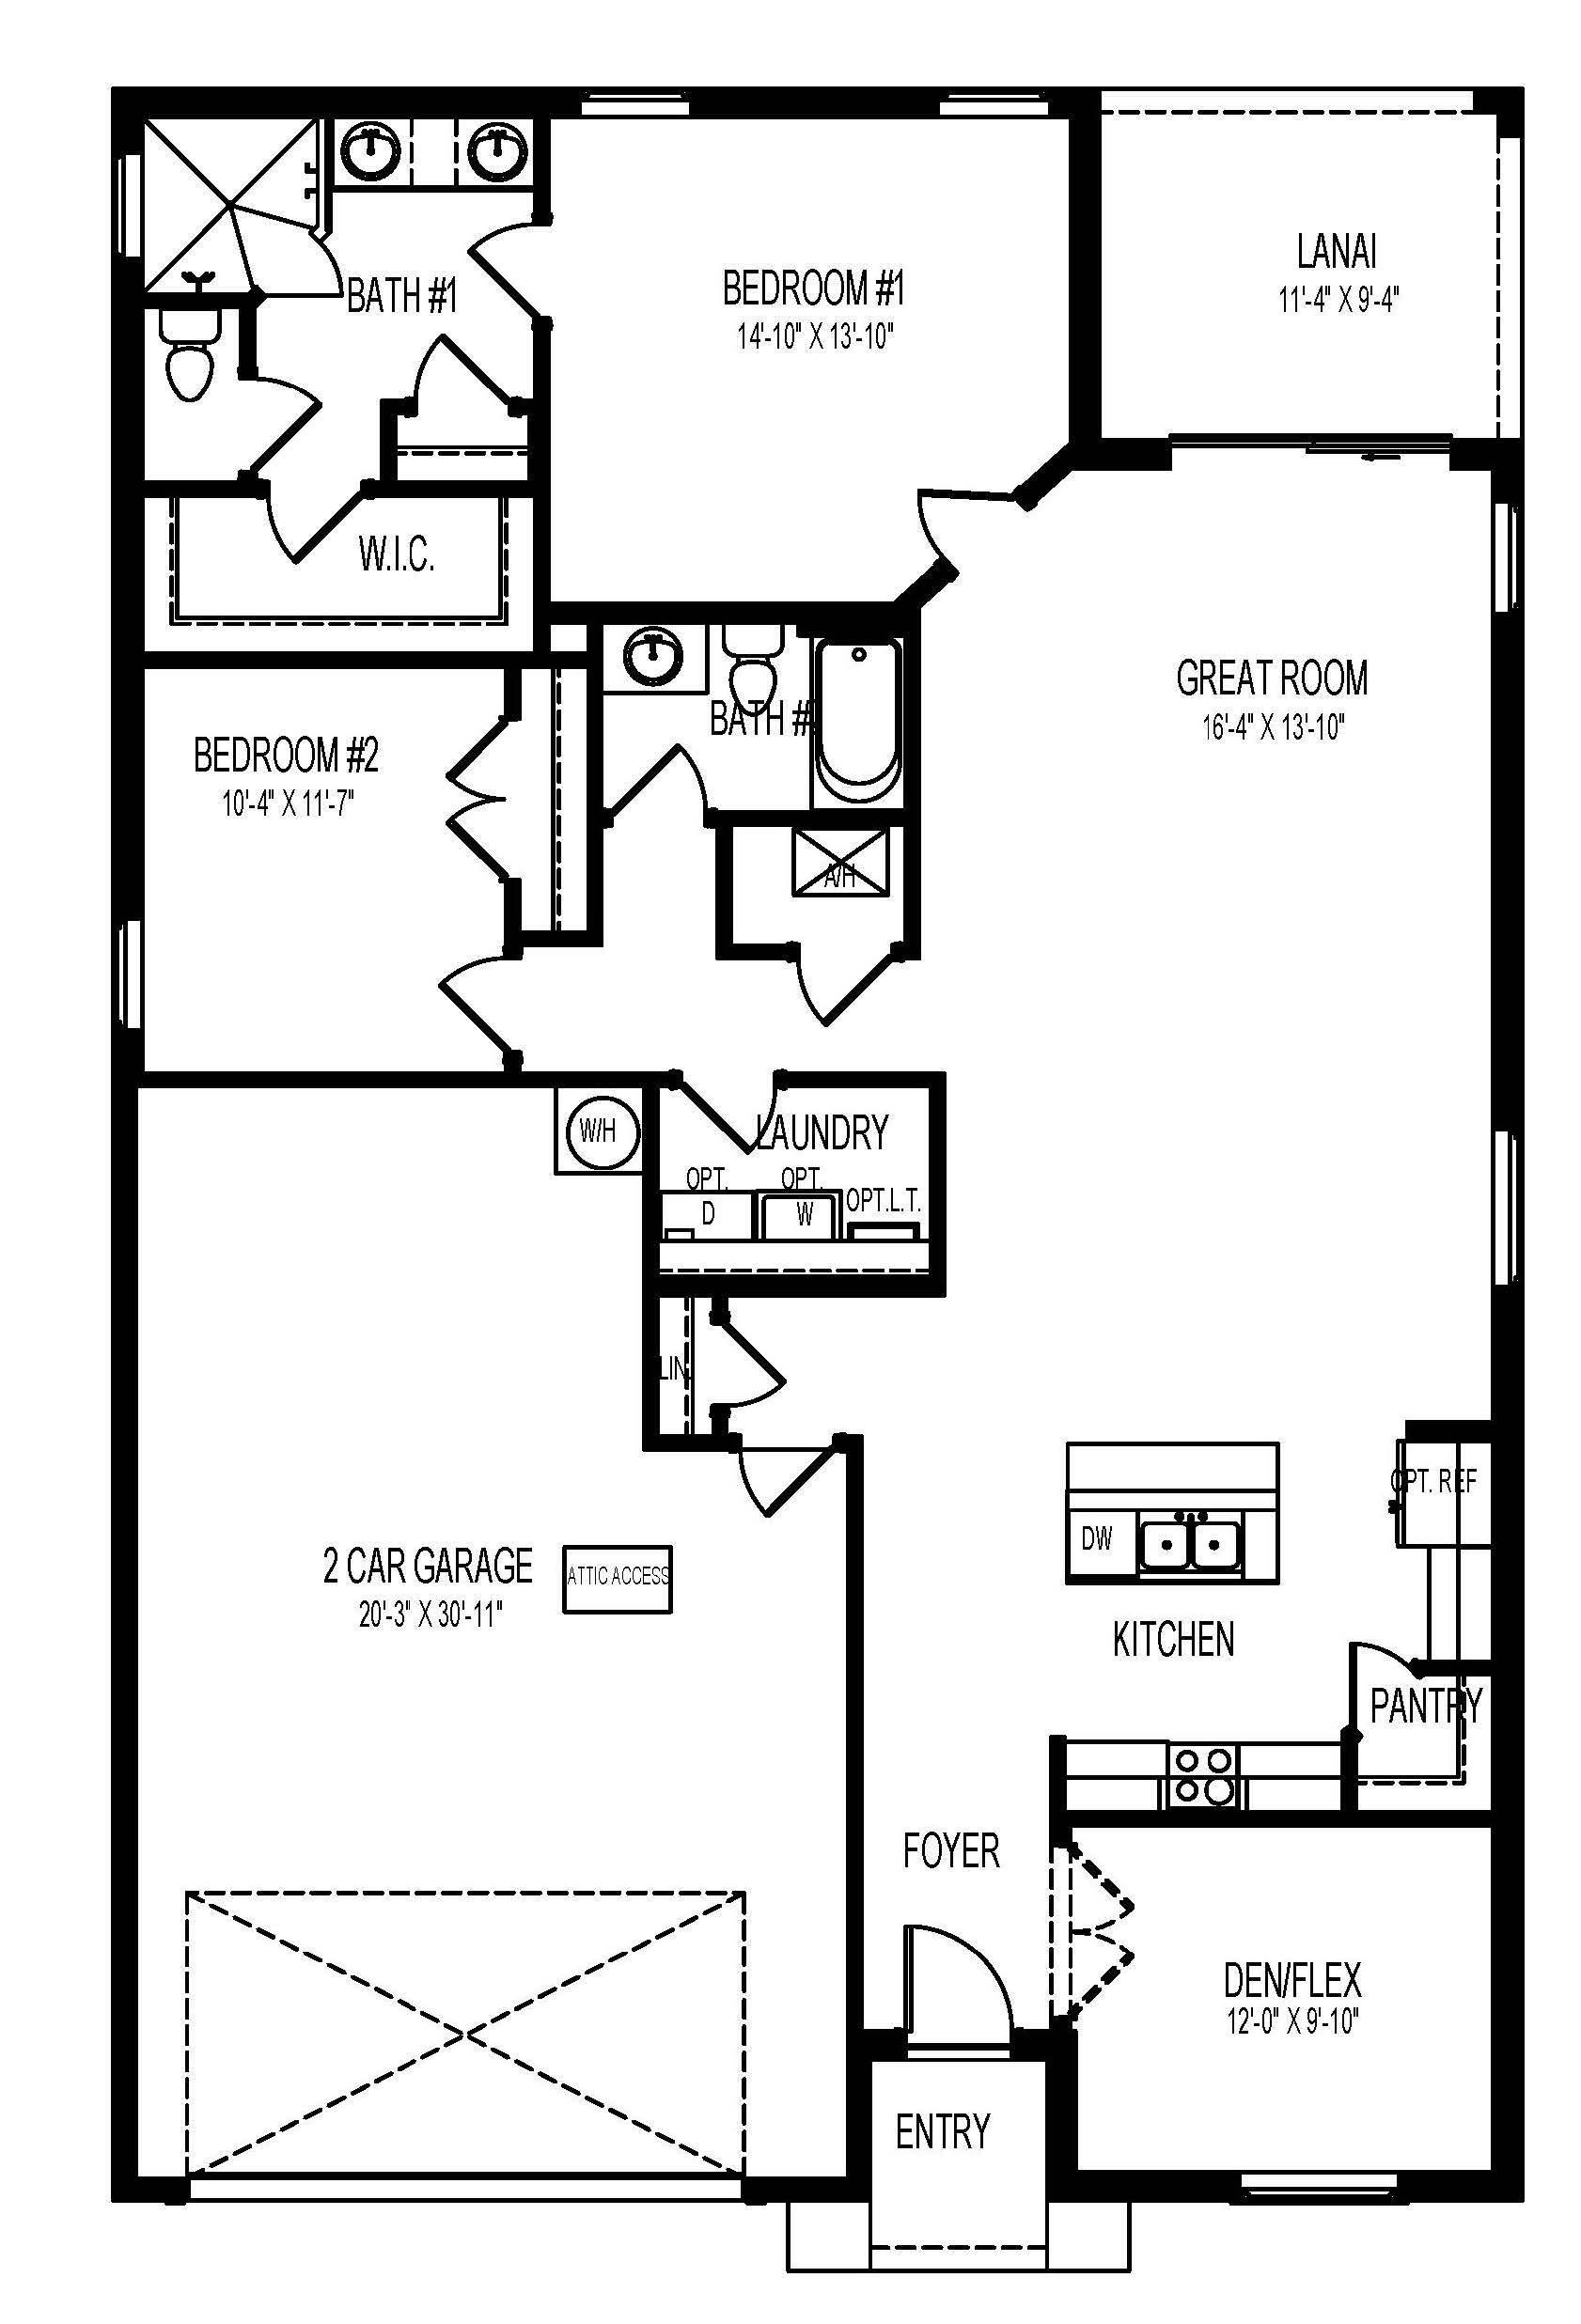 Stonewater Floor-plans - Stonewater Homes for Sale in Cape Coral FL